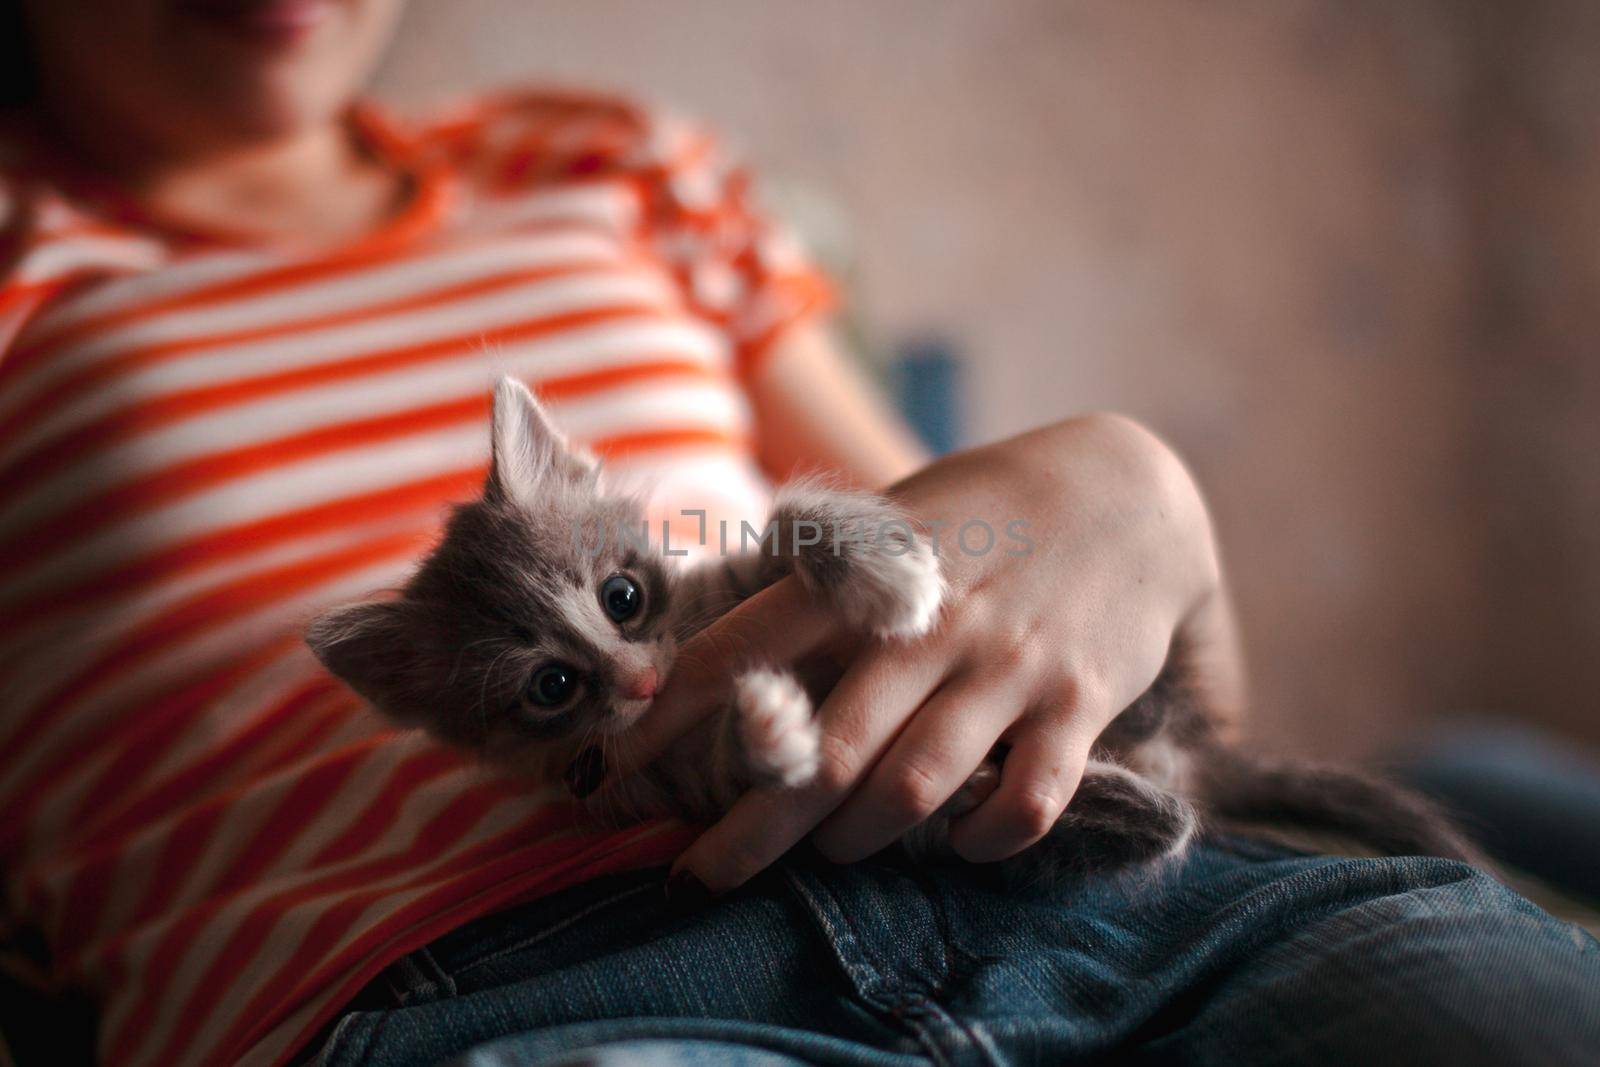 A grey kitten trying to bite a girl's hand